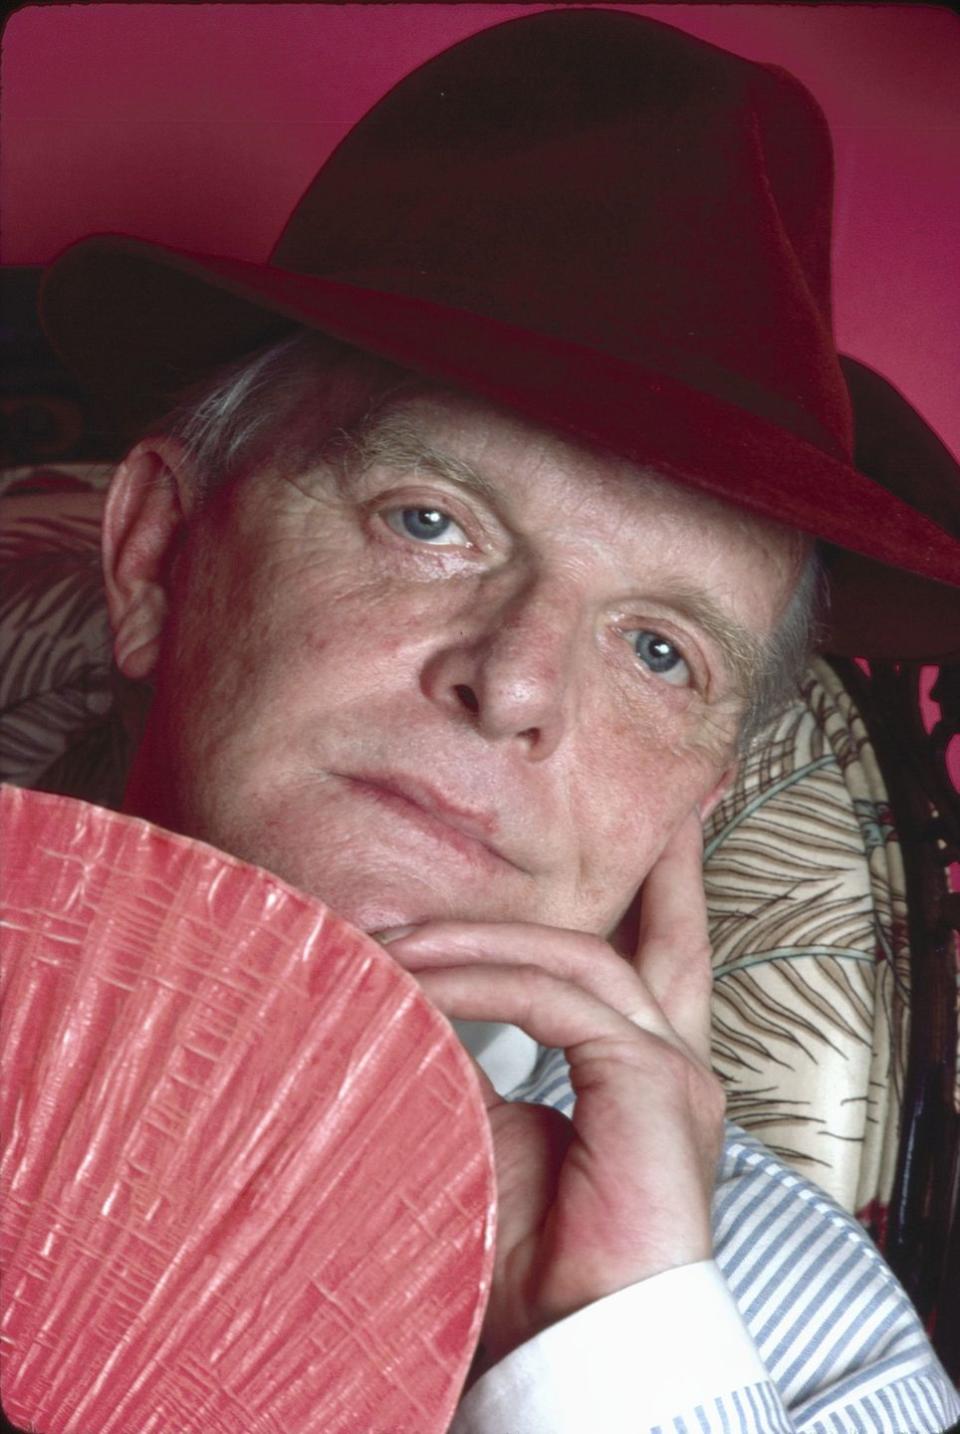 truman capote looks at the camera as he caresses his face with one hand, he wears a red hat and holds a pink fan below his face